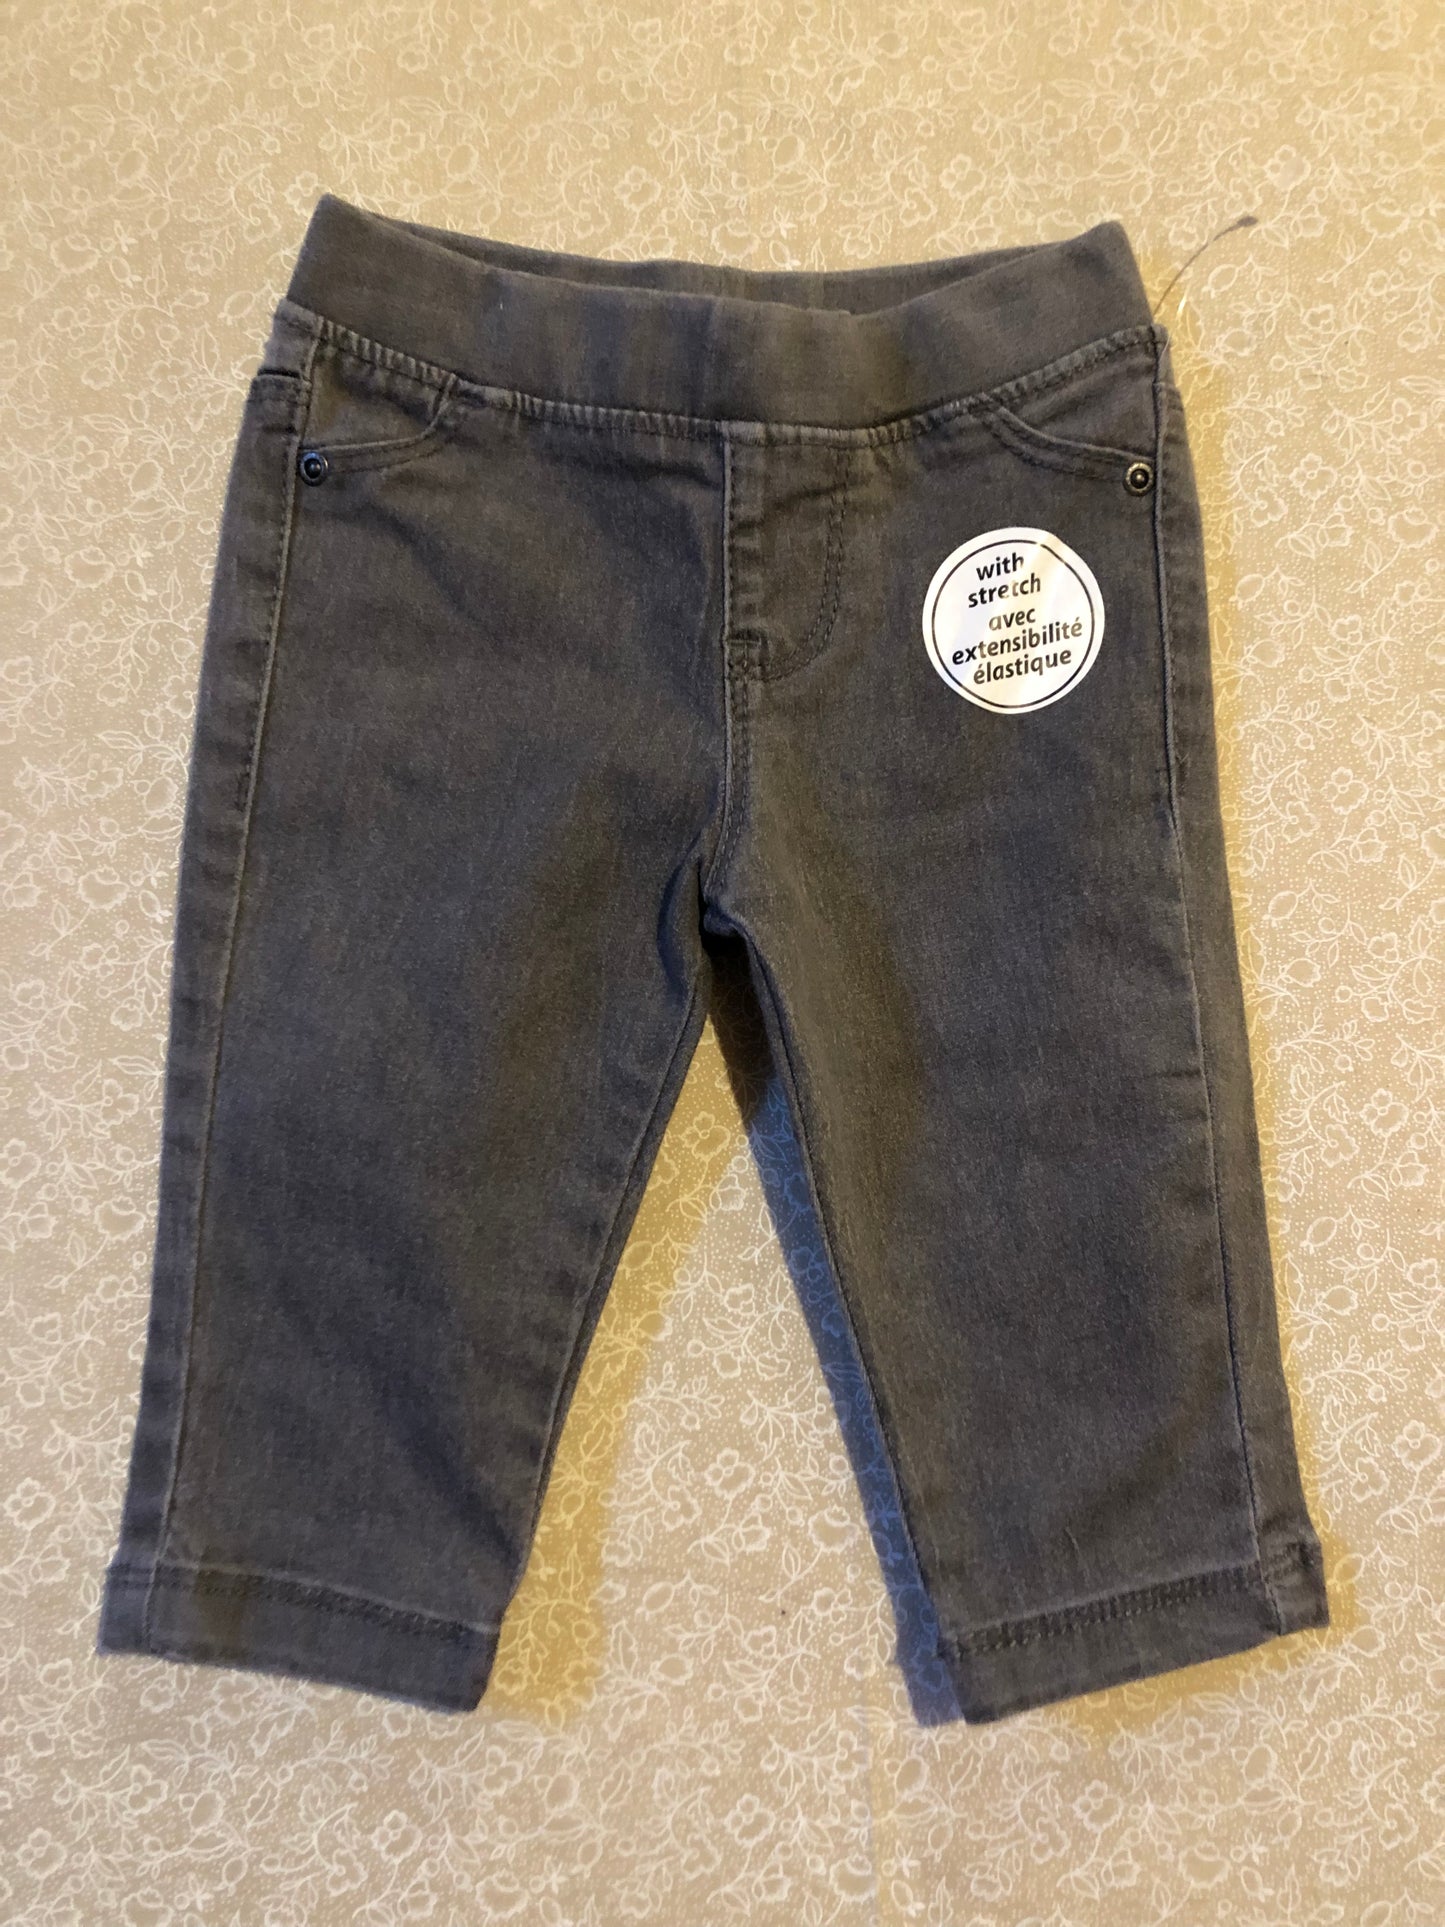 3-6-month-pants-george-grey-jeans